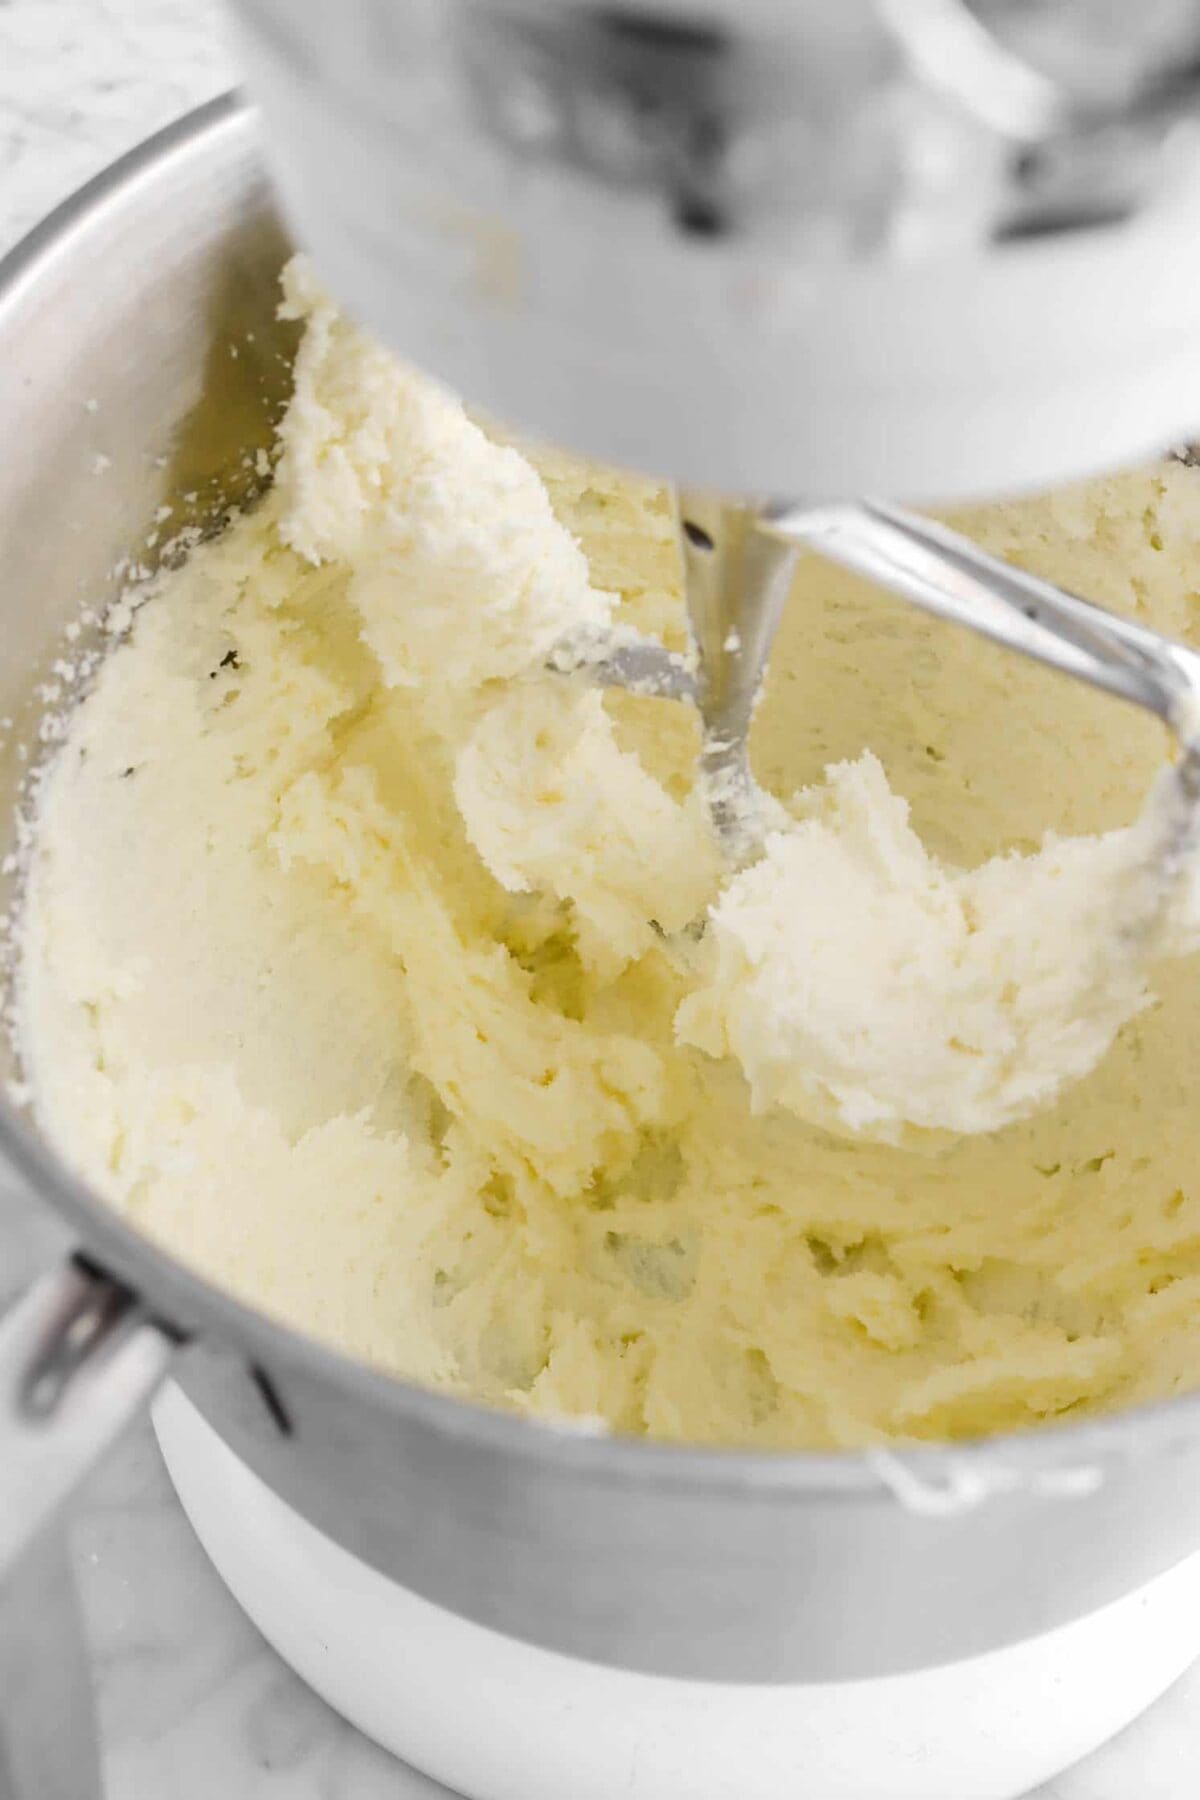 butter and sugar beaten together